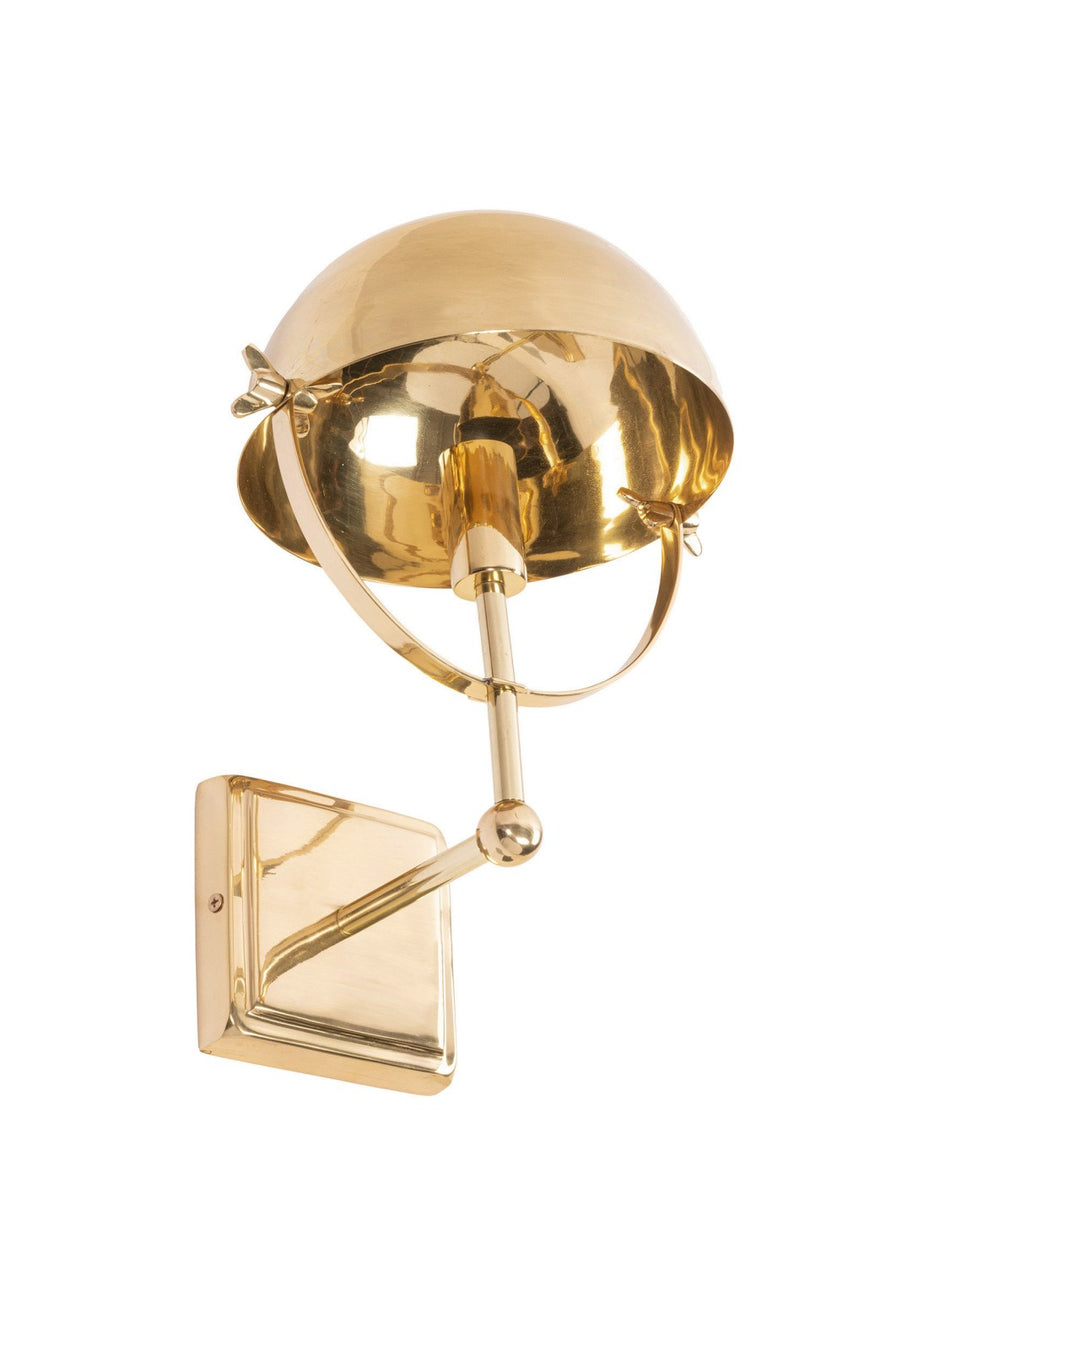 quentin-sconce-polished-brass-dome-shade-wall-light-mind-the-gap-lighting-